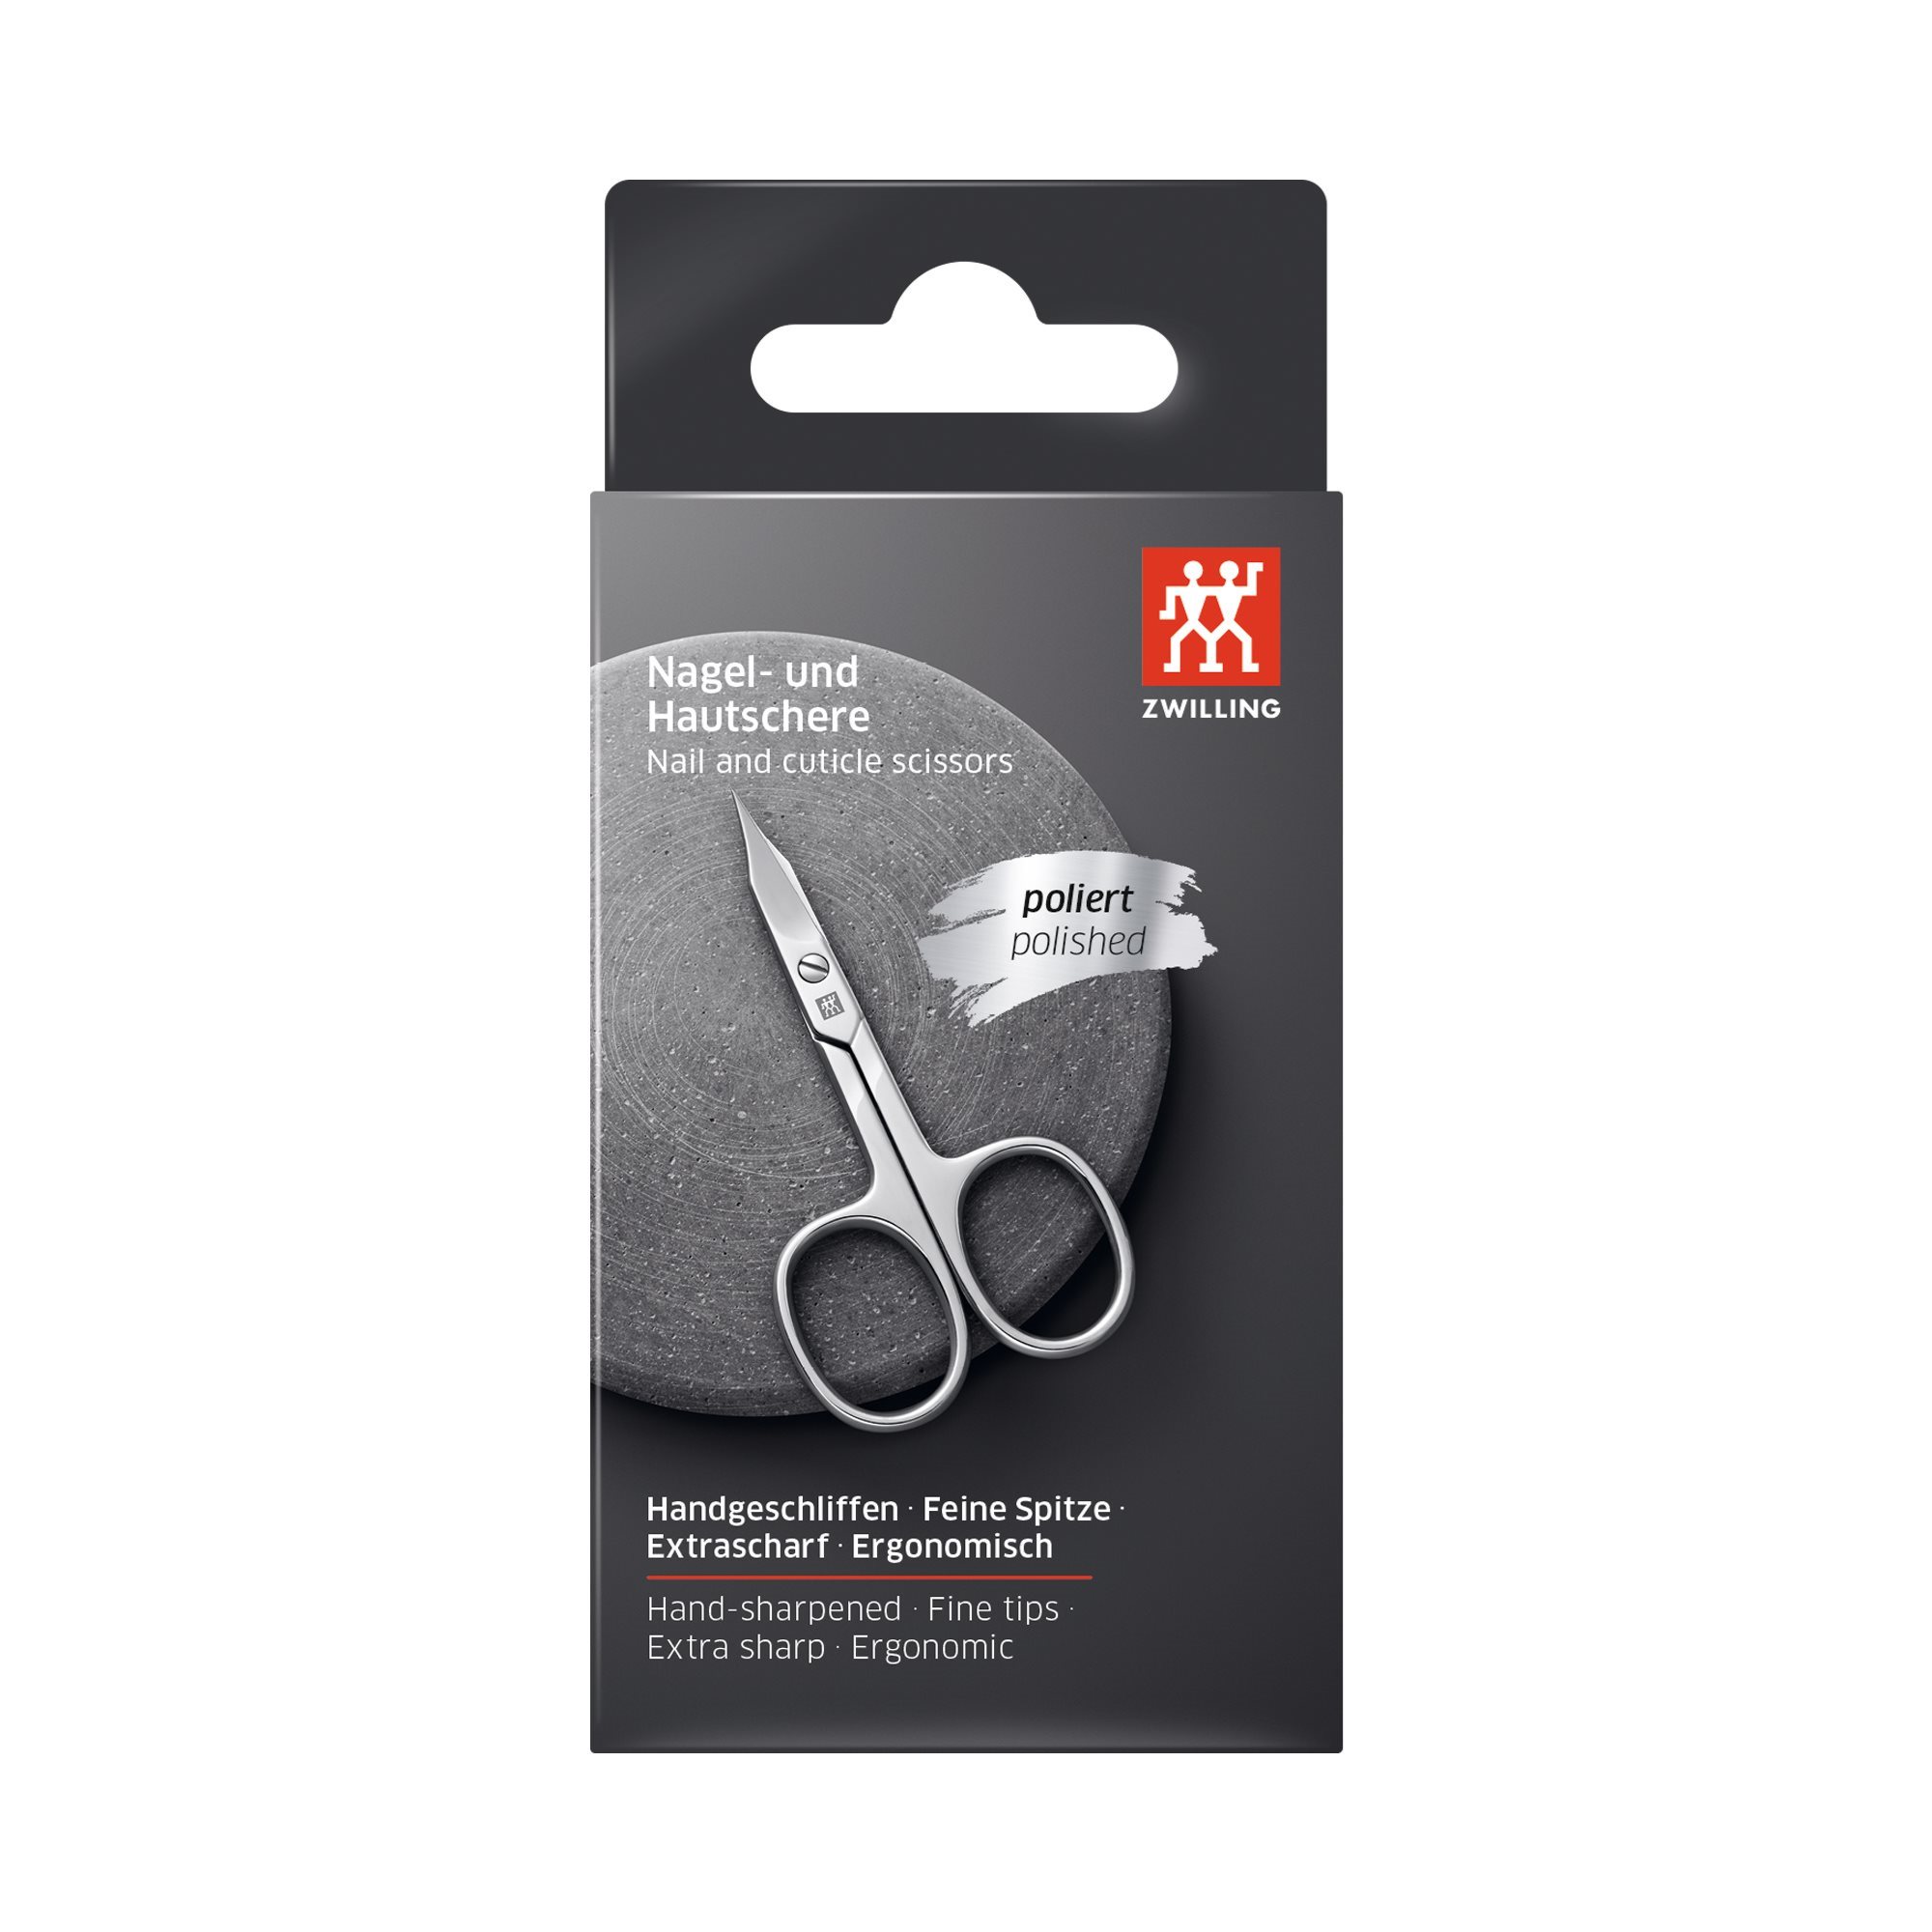 Nail and cuticle scissor, TWIN Zwilling - | Classic KitchenShop